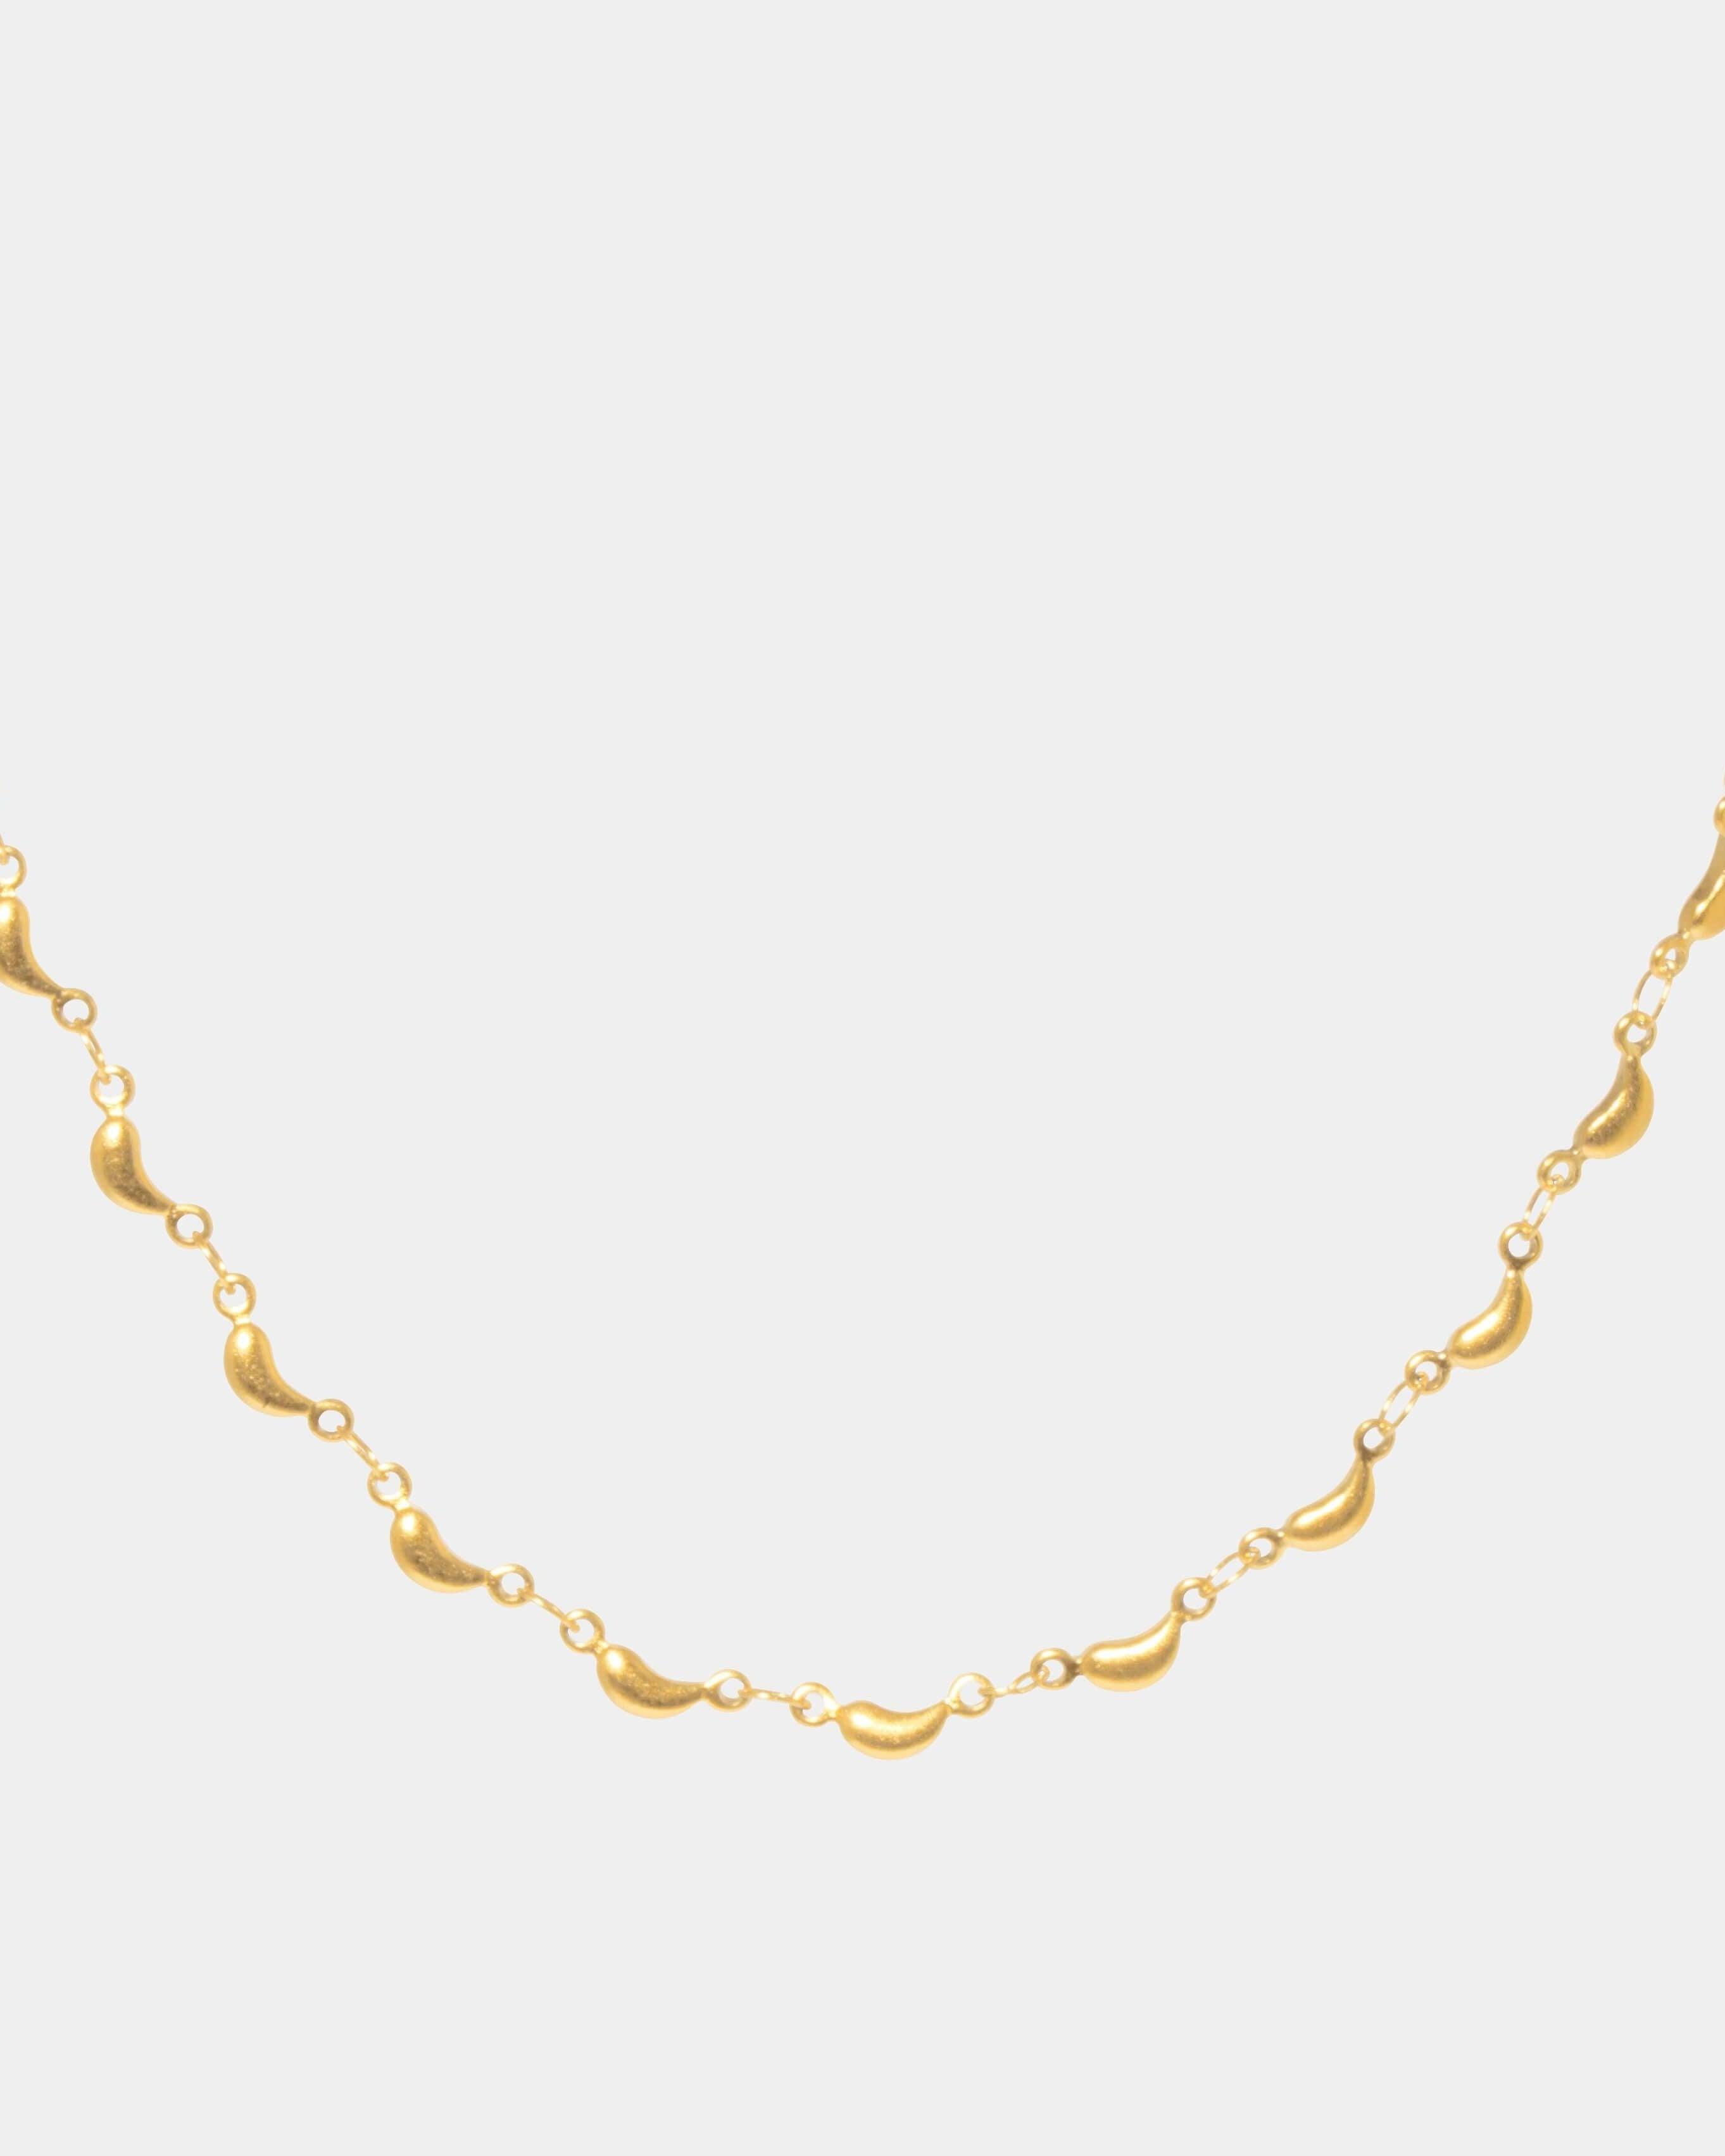 PEBBLE CHAIN NECKLACE - LIMELY